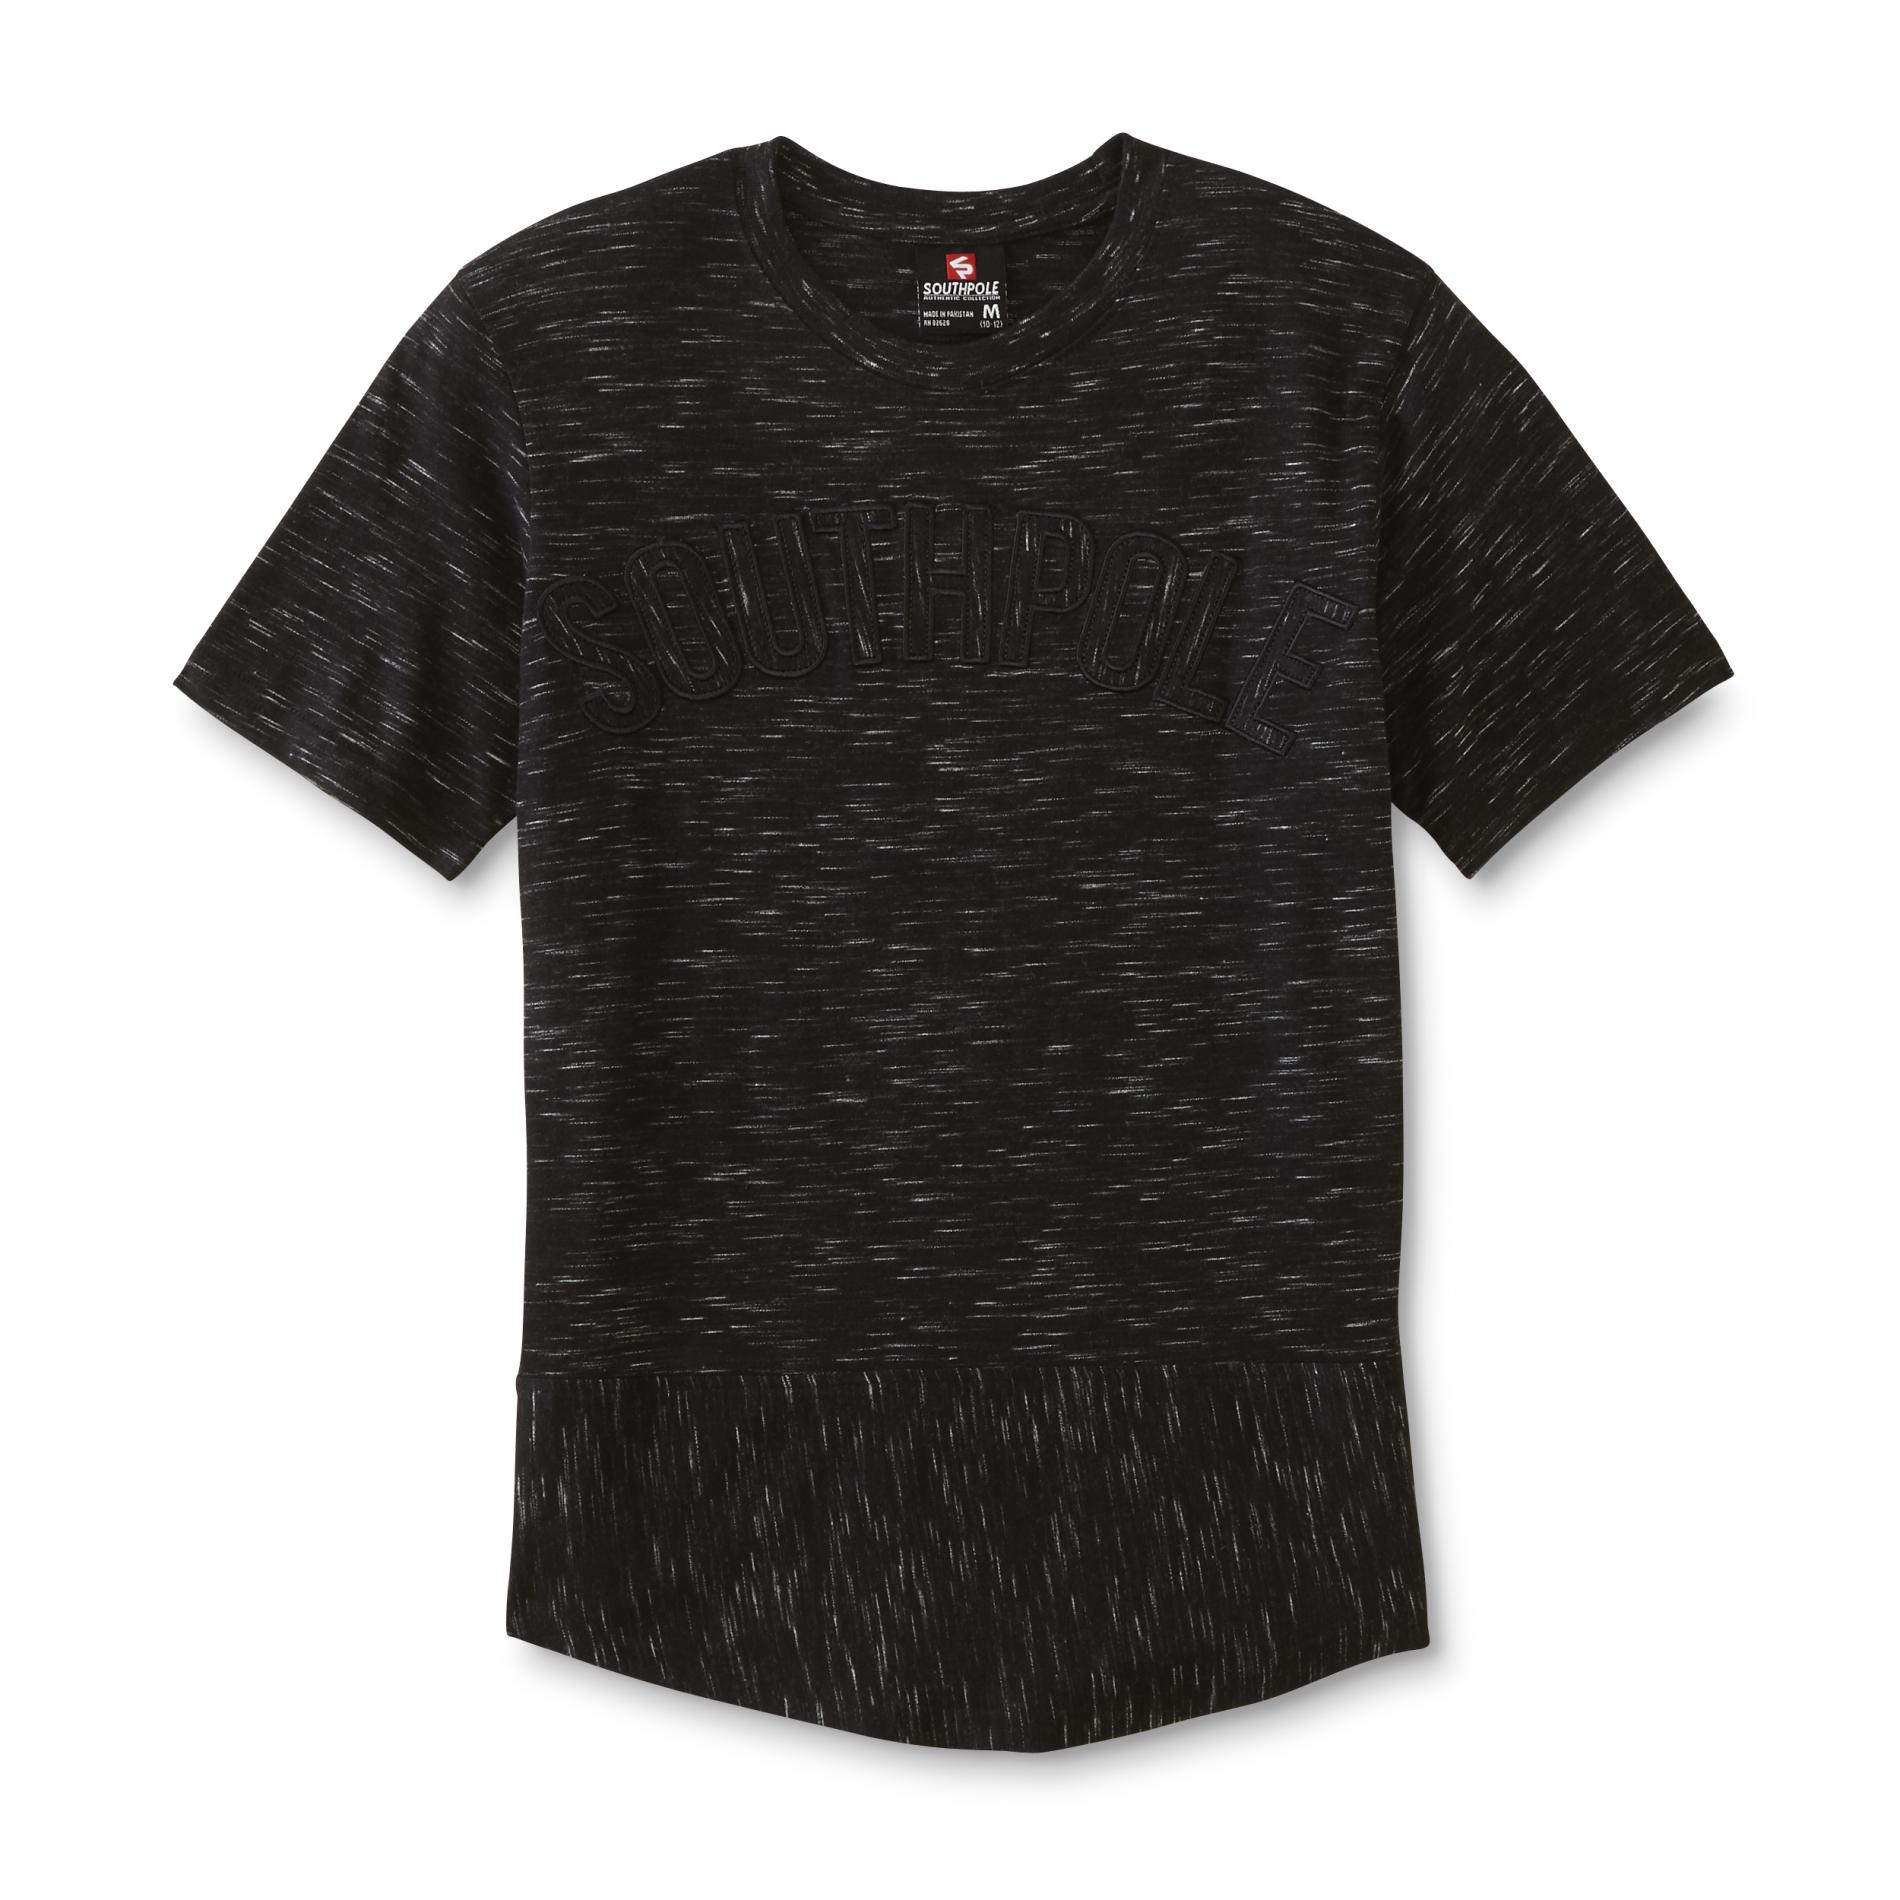 Southpole Boys' Embroidered Graphic T-Shirt - Space-Dyed